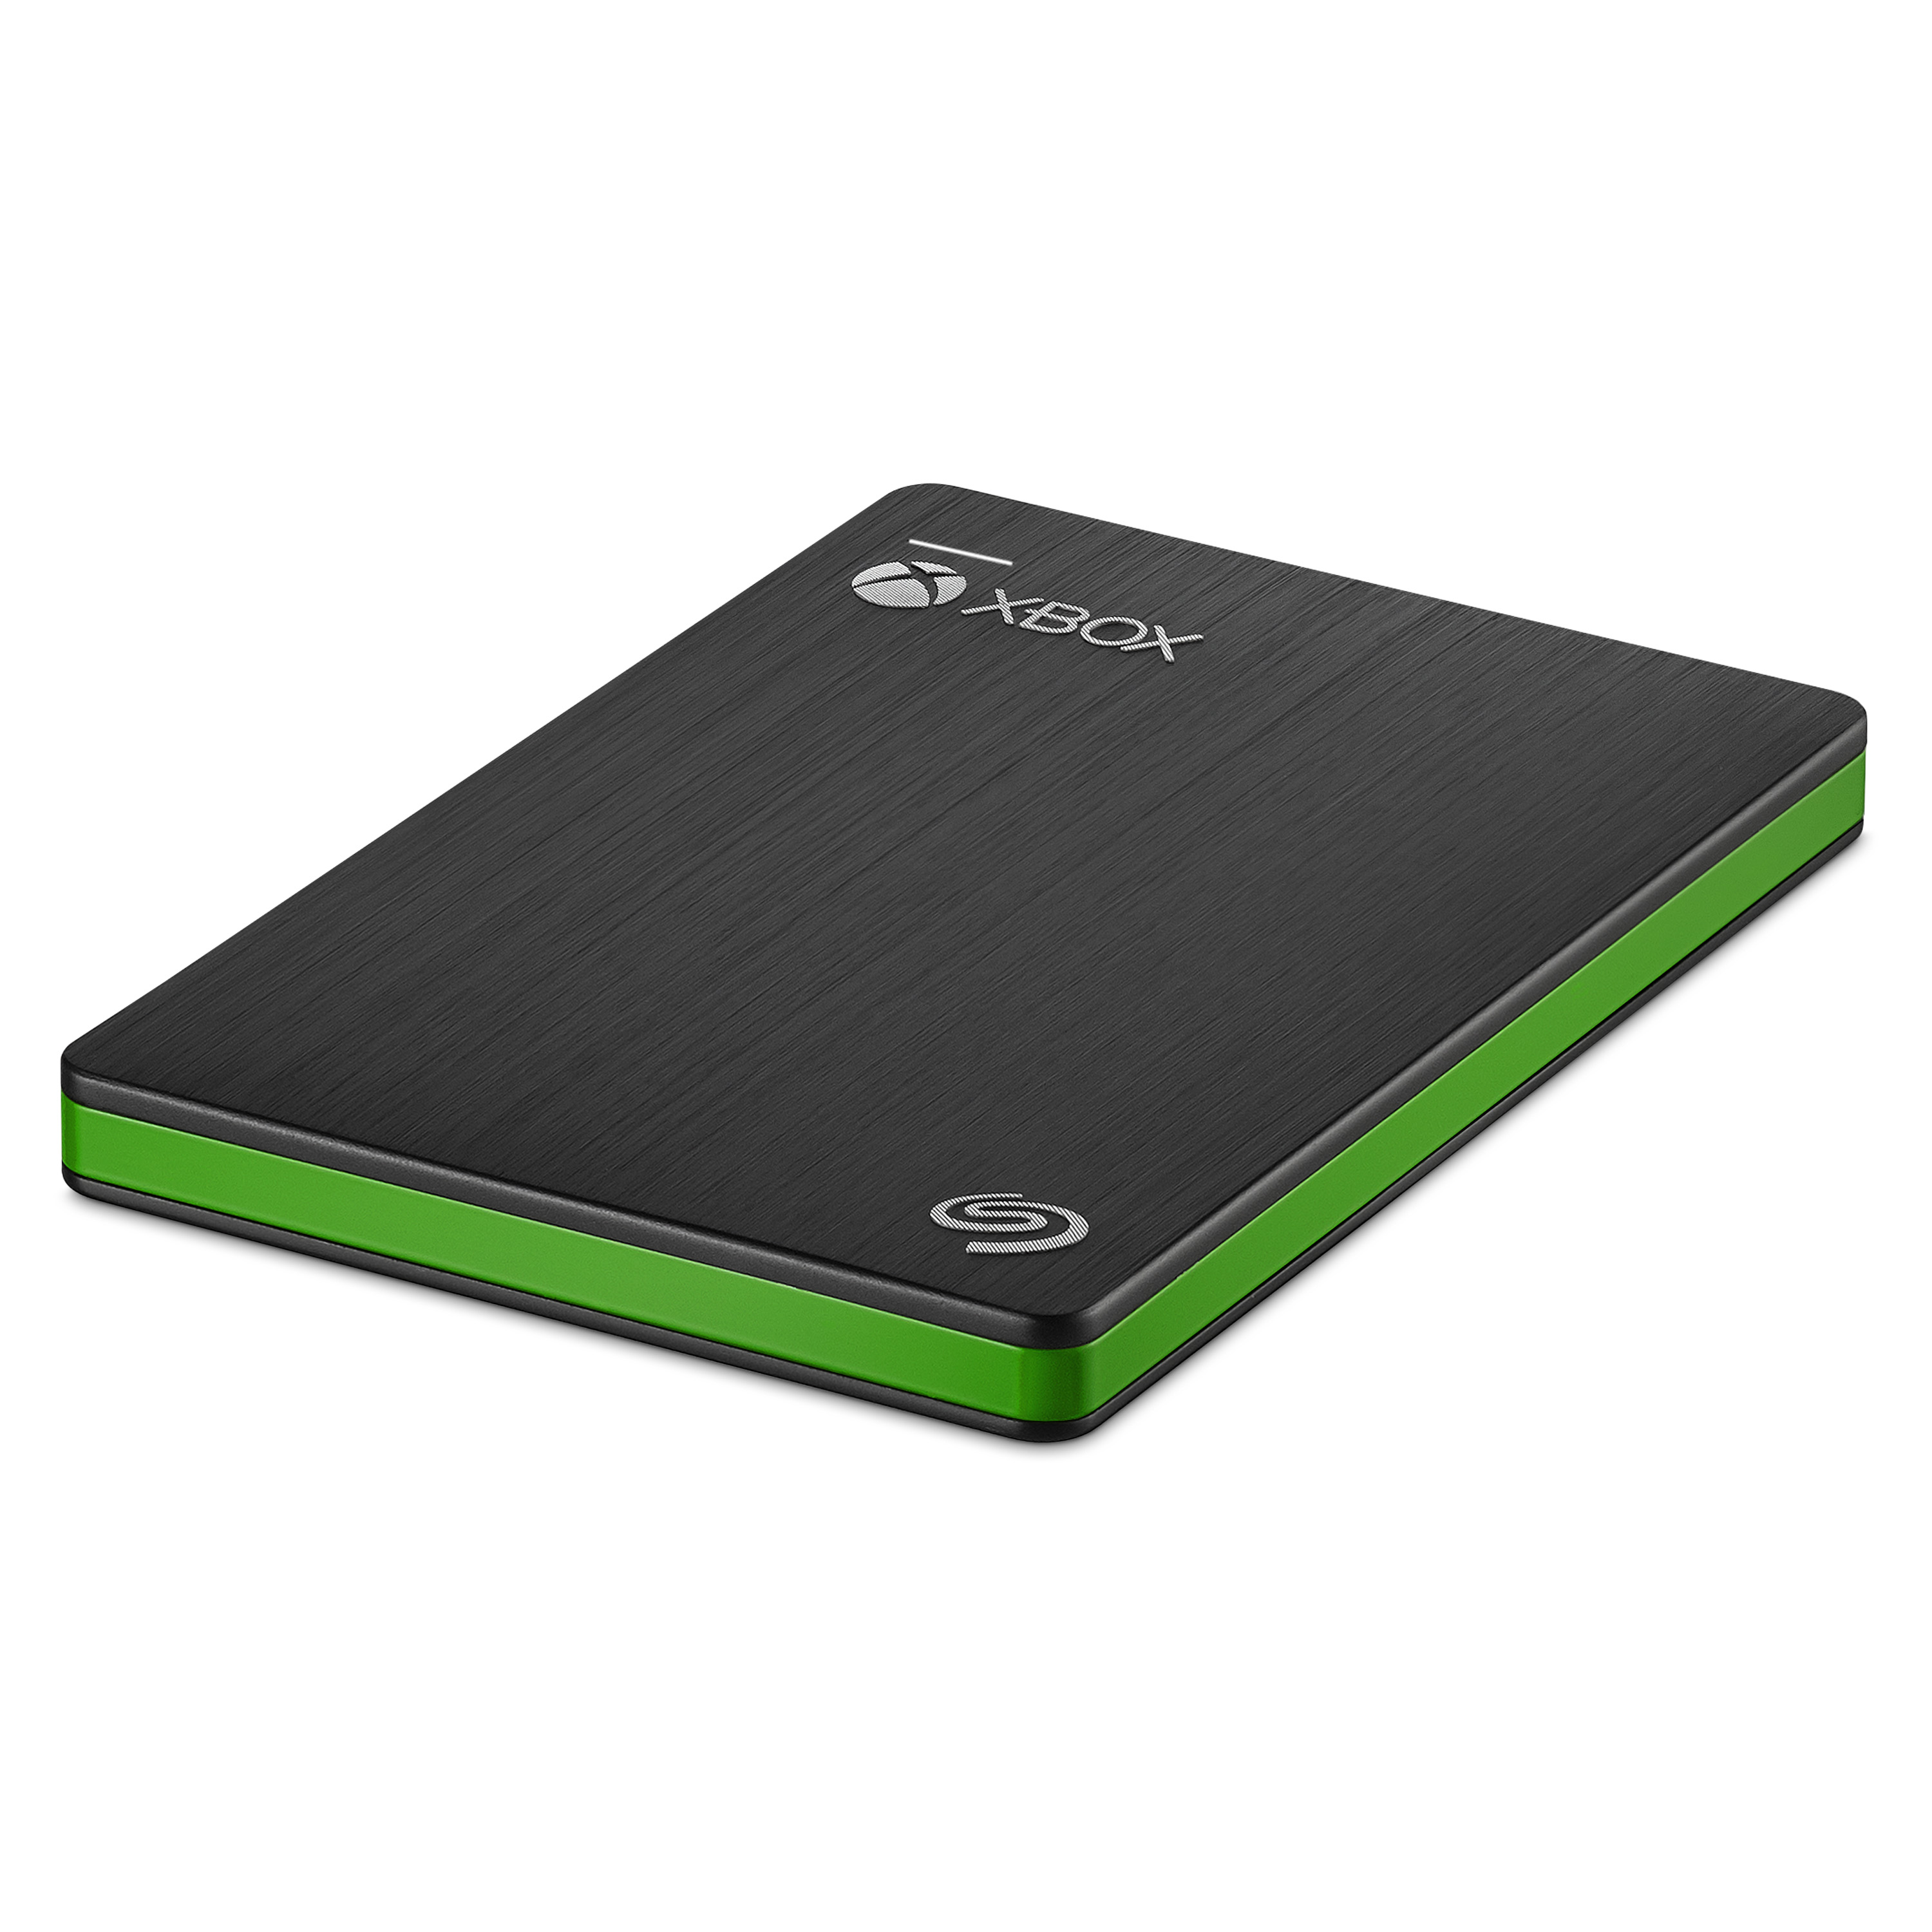 Seagate Enhances Gaming Experience With New Game Drive For Xbox SSD | News | Seagate US3000 x 3000